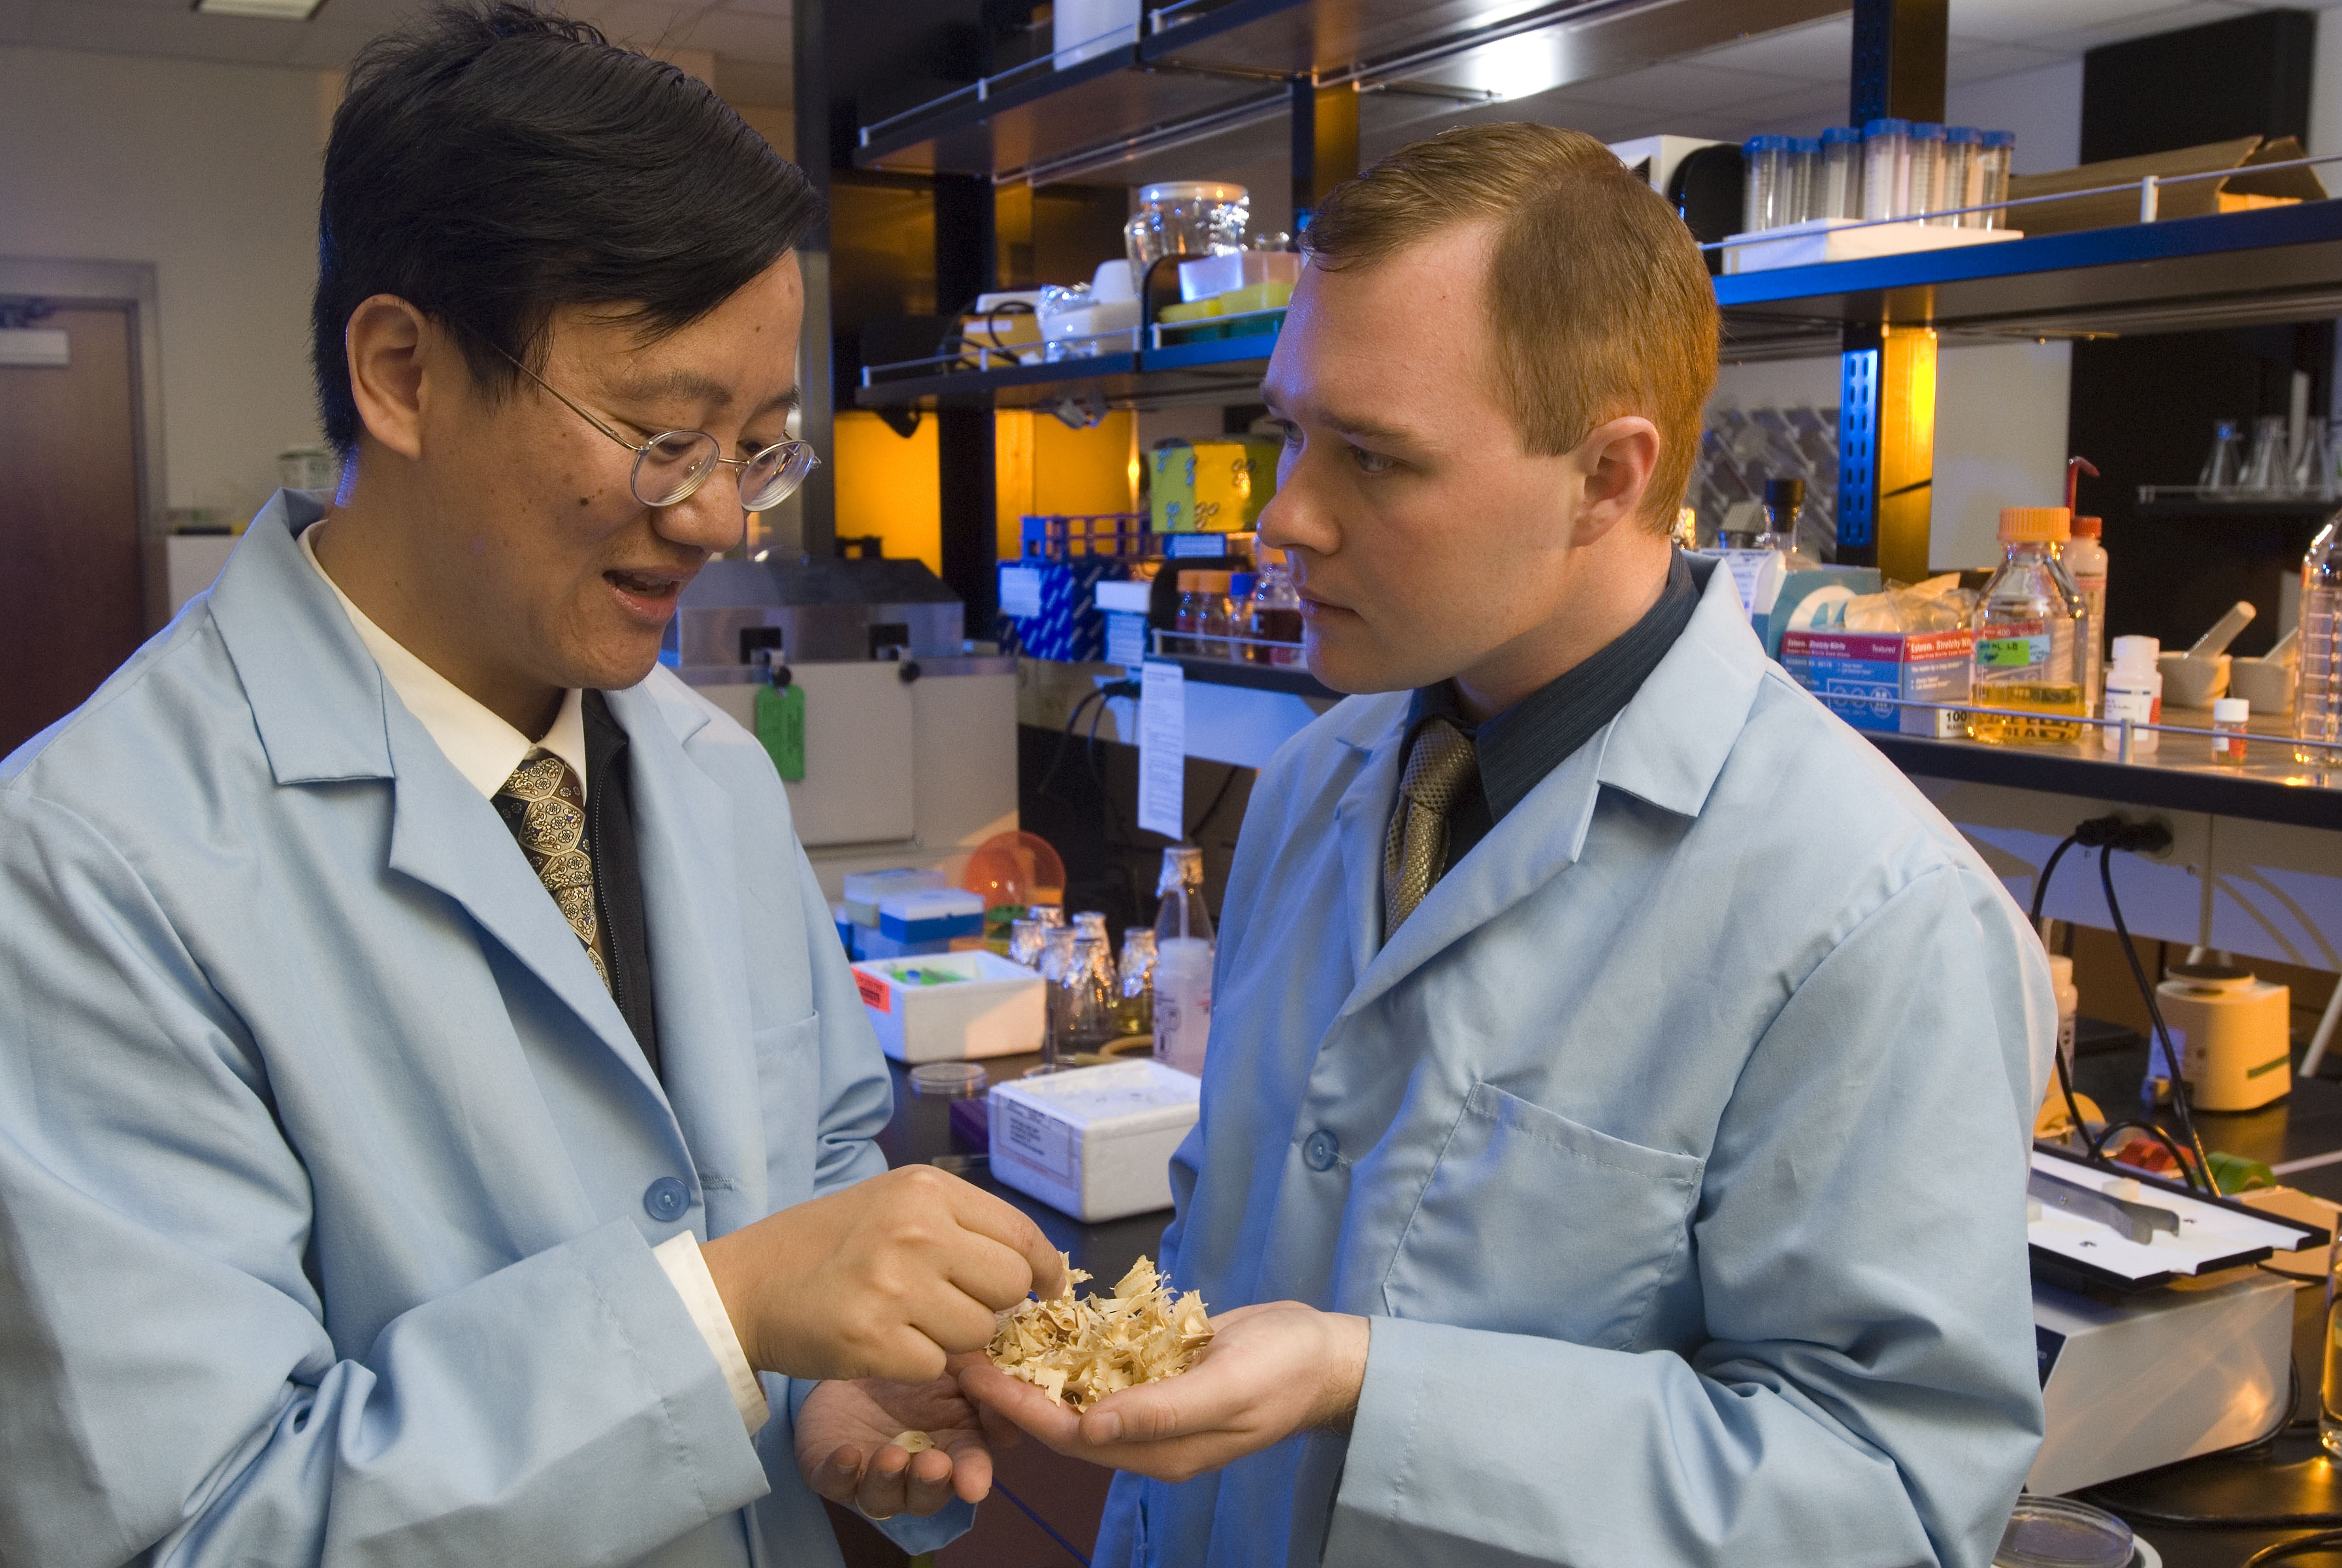 Percival Zhang (left) discusses conversion of biomass to energy with Geoff Moxley, who recently received his master of science degree in biological systems engineering from Virginia Tech.